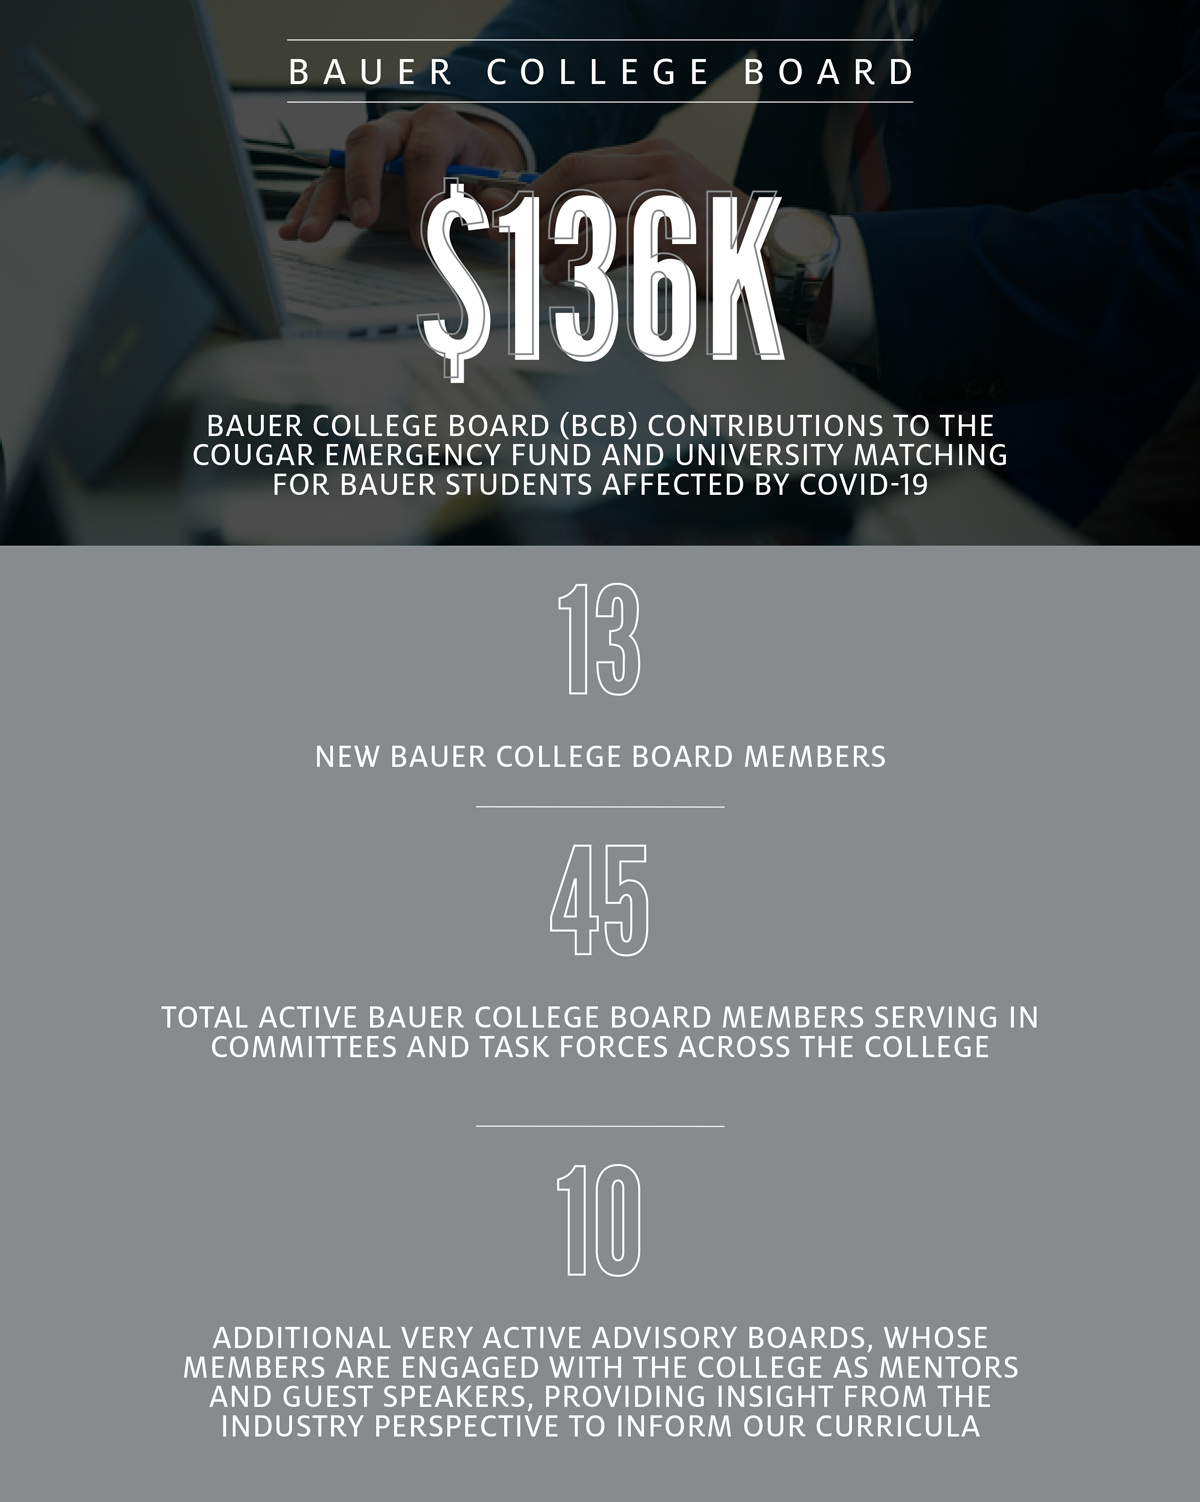 Bauer College Board contributions